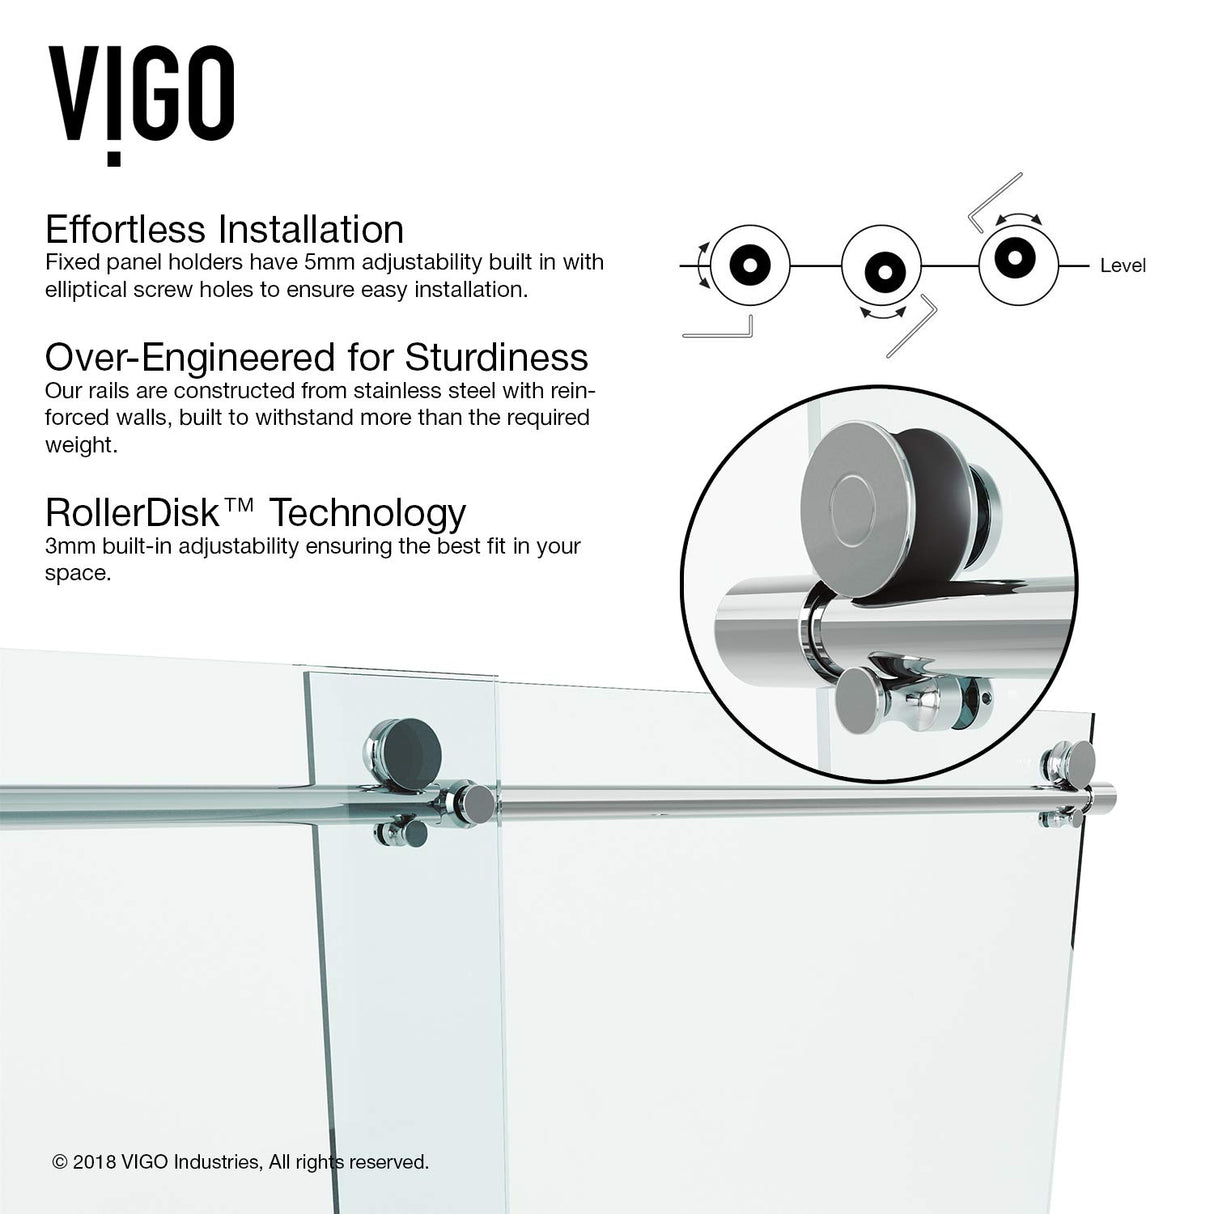 VIGO Adjustable 72-73" W x 74" H Ferrara Frameless Sliding Rectangle Shower Door with Clear Tempered Glass, Reversible Door Handle and Stainless Steel Hardware in Chrome-VG6080CHCL7274